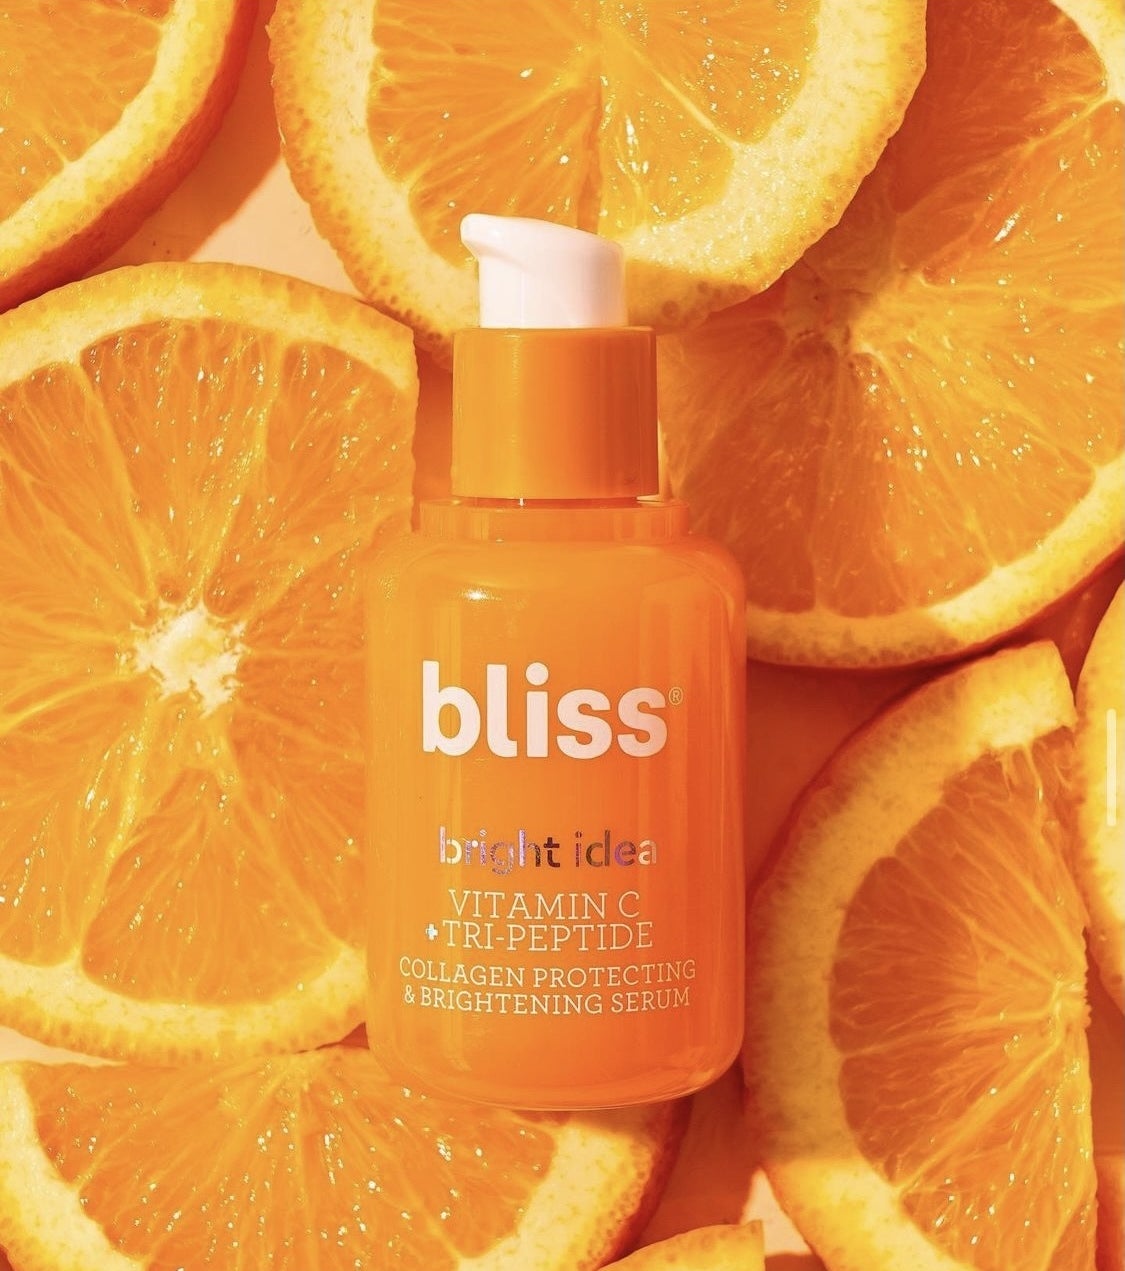 A bottle of Bliss vitamin C serum on a pile of orange slices